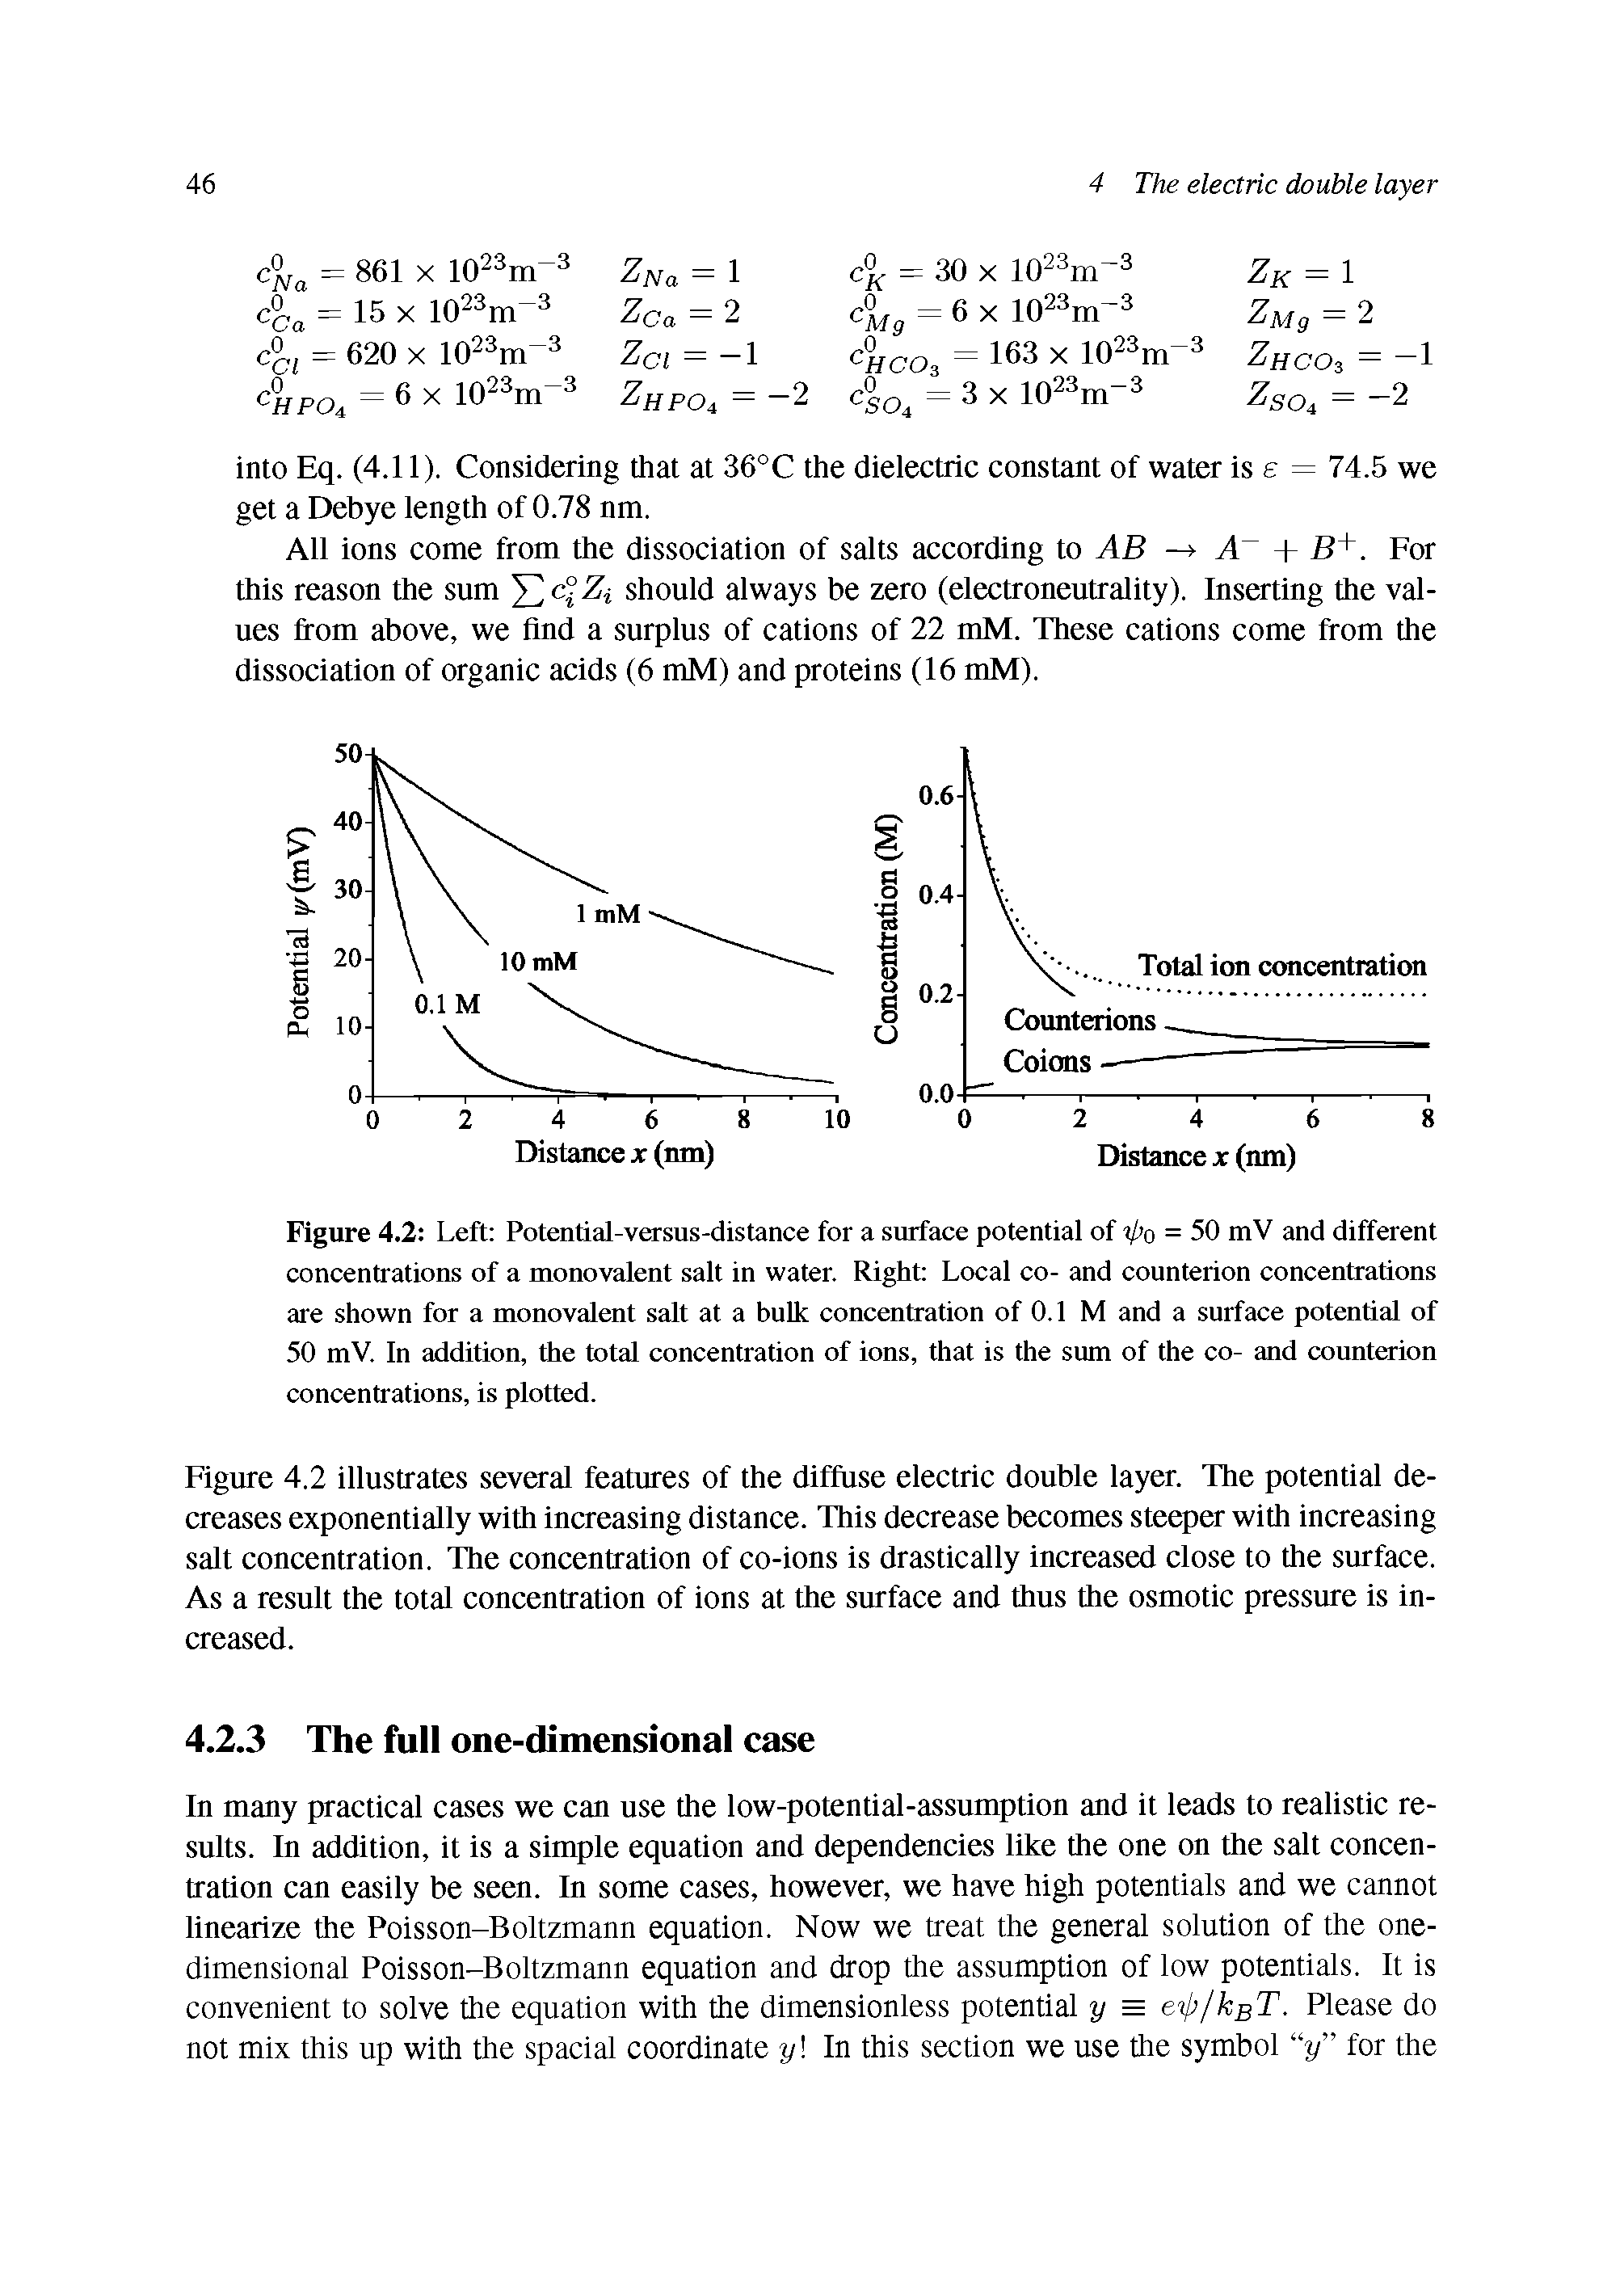 Figure 4.2 Left Potential-versus-distance for a surface potential of )/>o = 50 mV and different concentrations of a monovalent salt in water. Right Local co- and counterion concentrations are shown for a monovalent salt at a bulk concentration of 0.1 M and a surface potential of 50 mV. In addition, the total concentration of ions, that is the sum of the co- and counterion concentrations, is plotted.